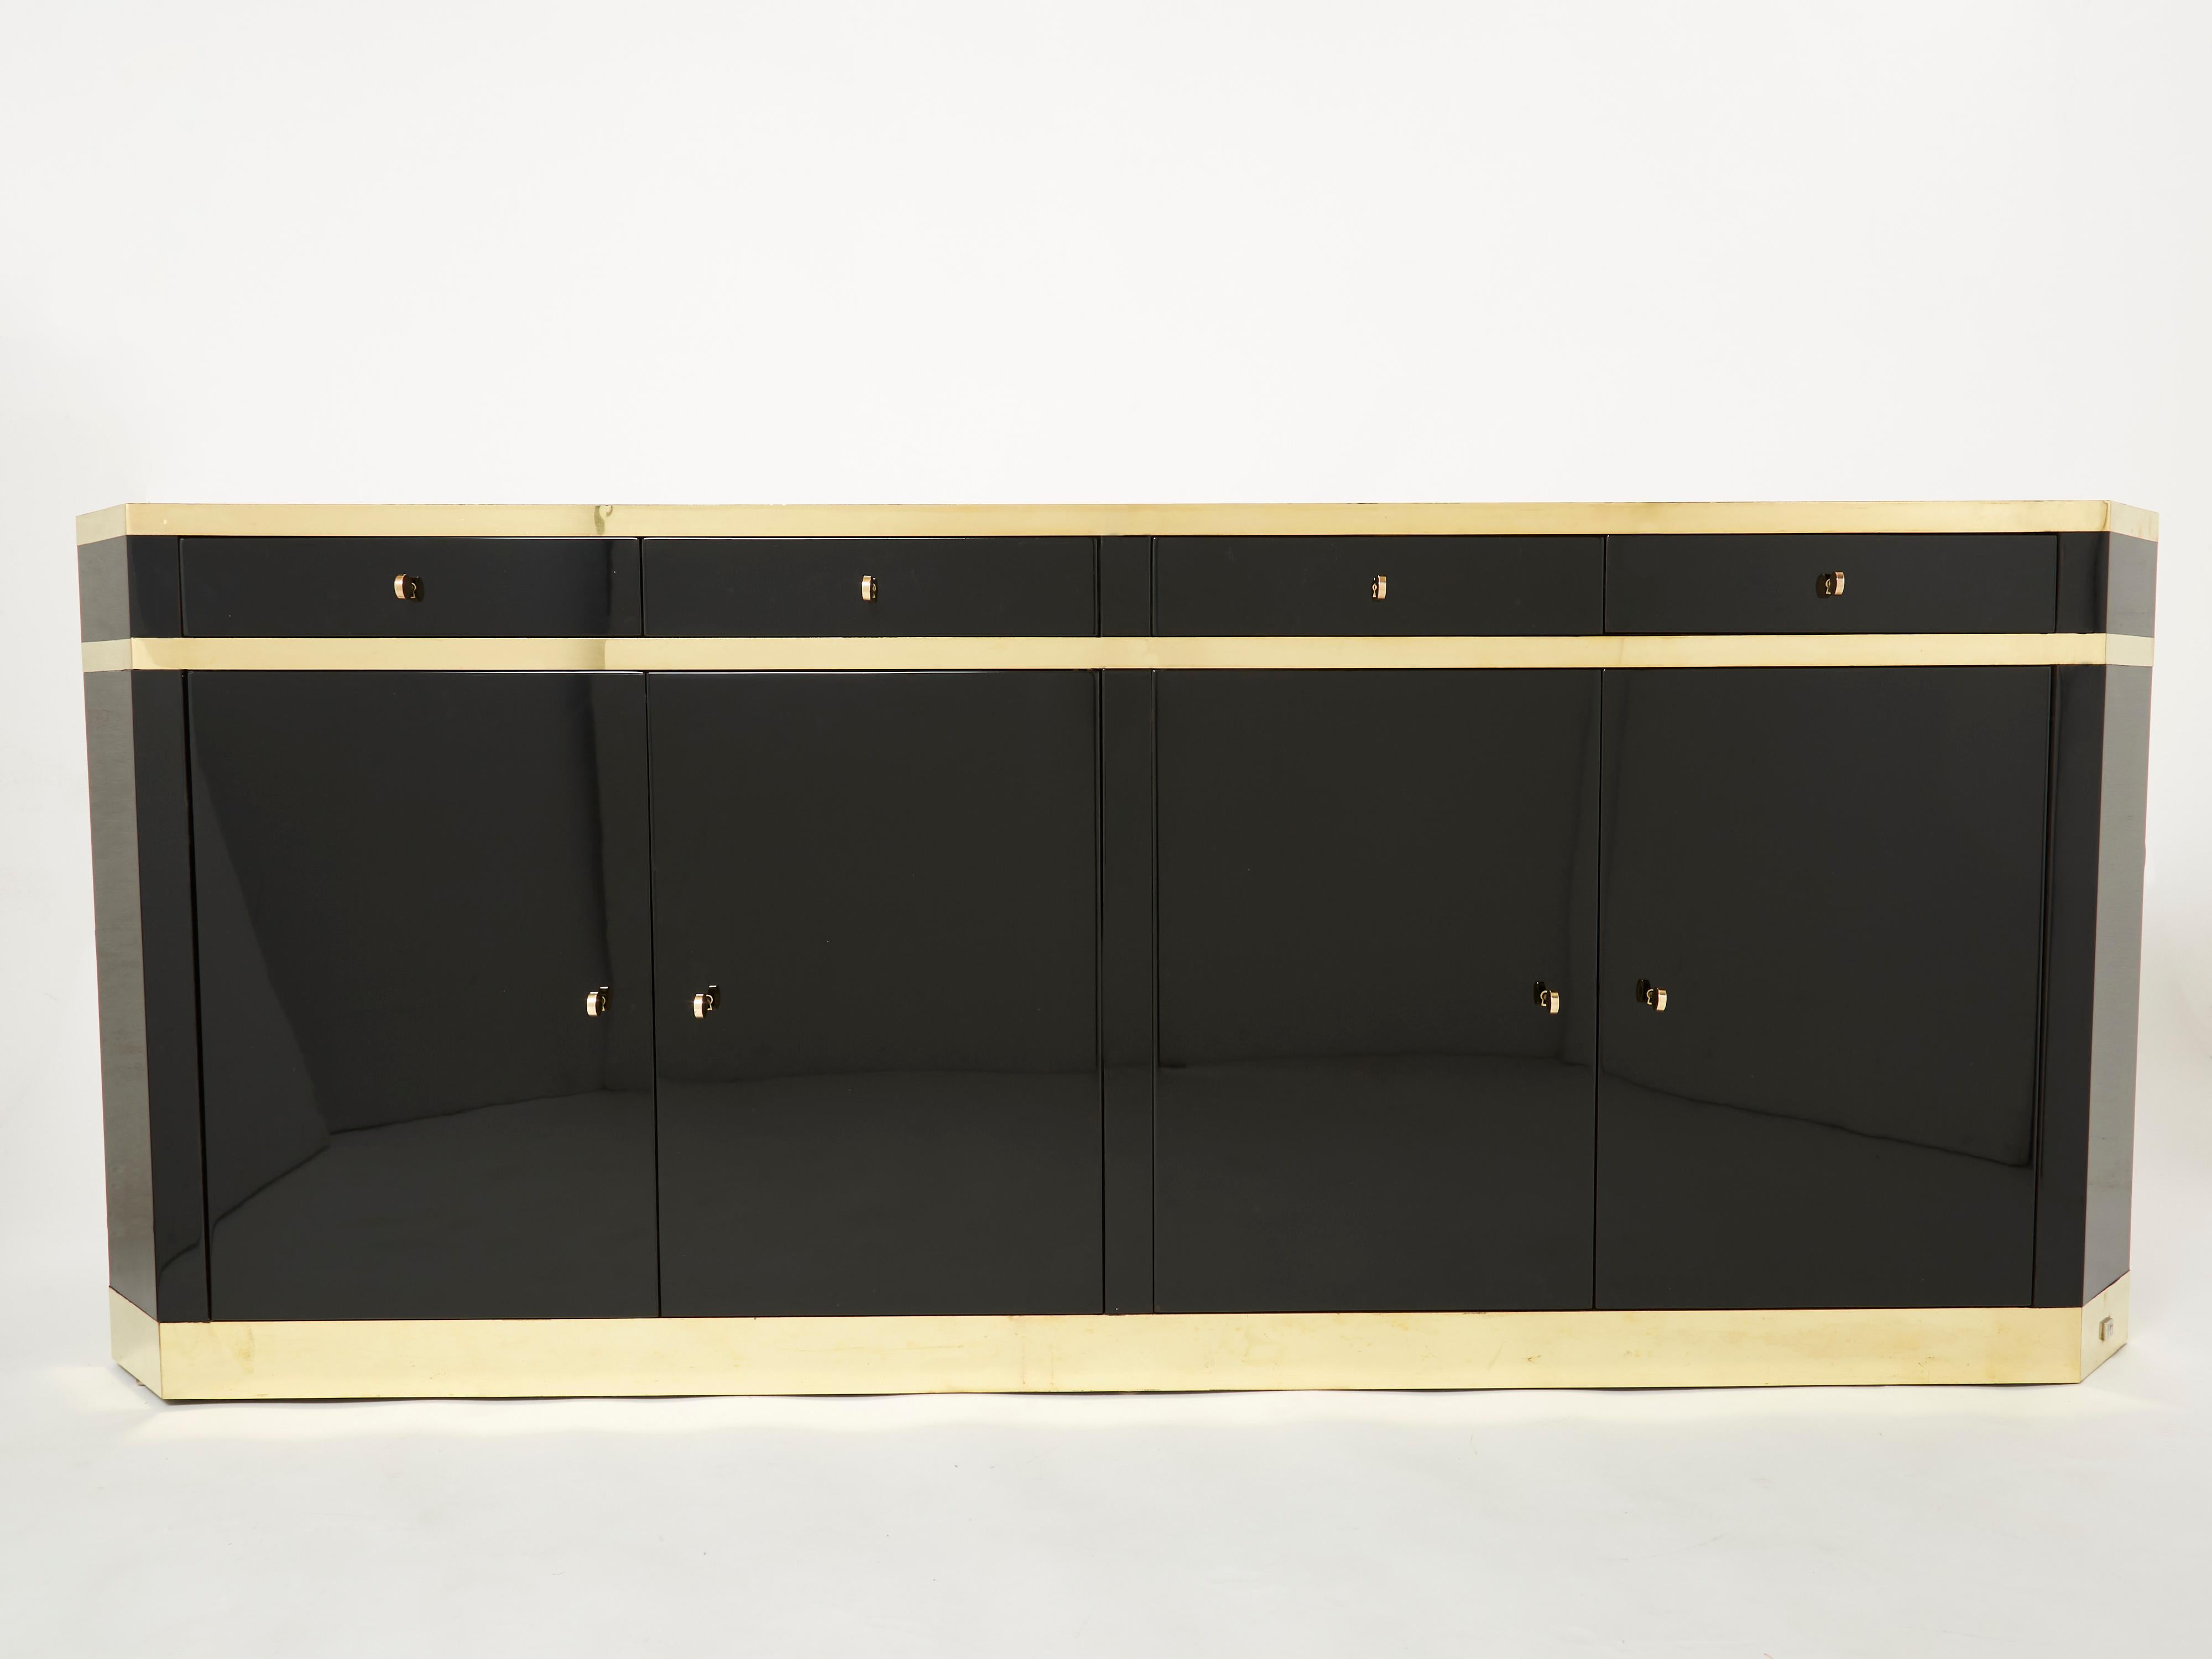 A timeless vintage piece, this mid-century sideboard feels imposing and glamourous, with thick, straight lines of brass adorning its exterior of reflective black lacquer. Glossy black lacquer, paired with bright brass accents and keys, feels crisp